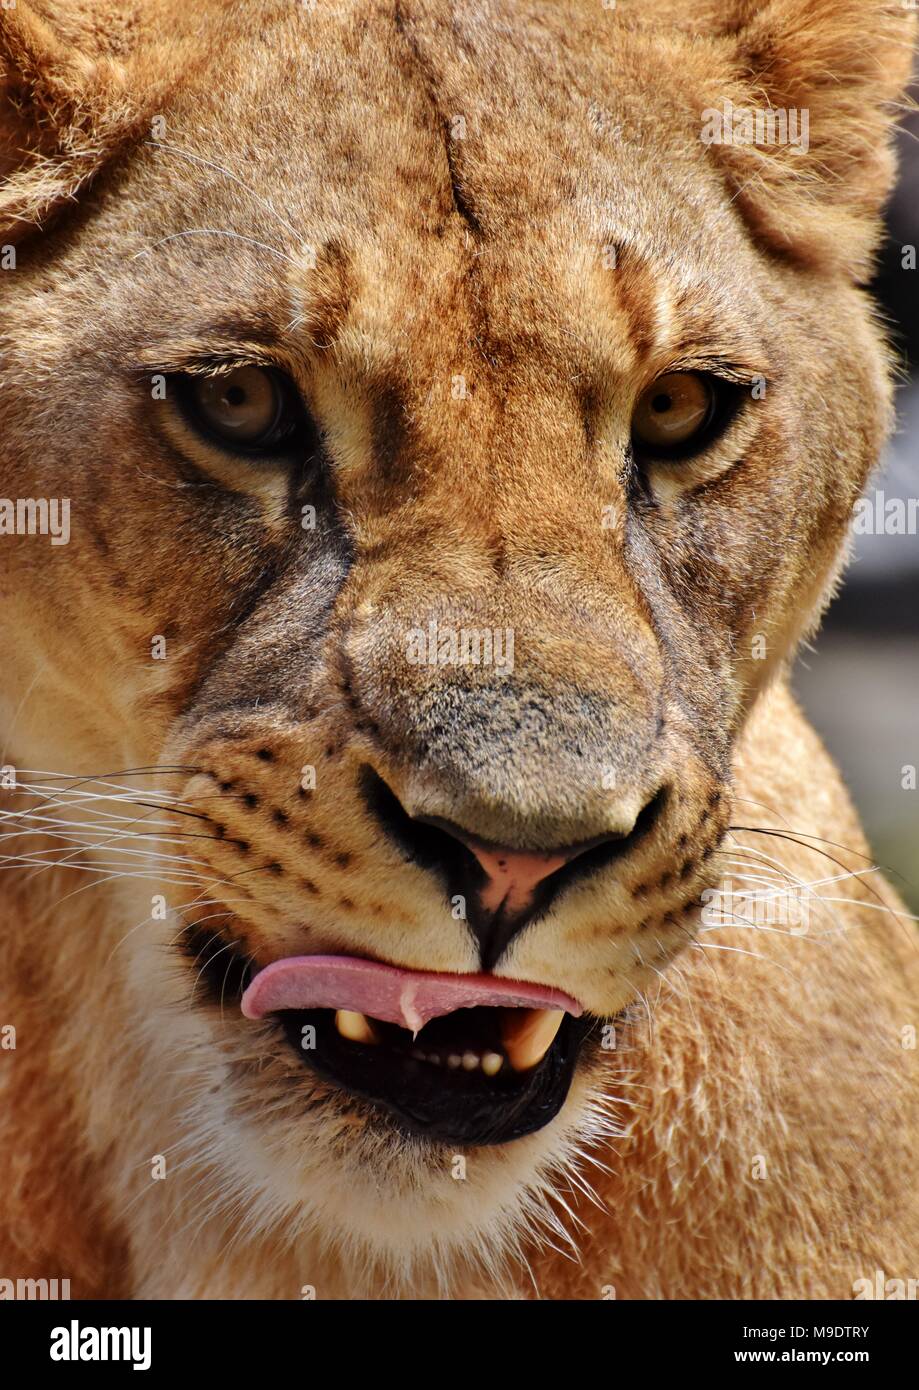 Close-up portrait of the face of a female lion (Panthera leo). Stock Photo